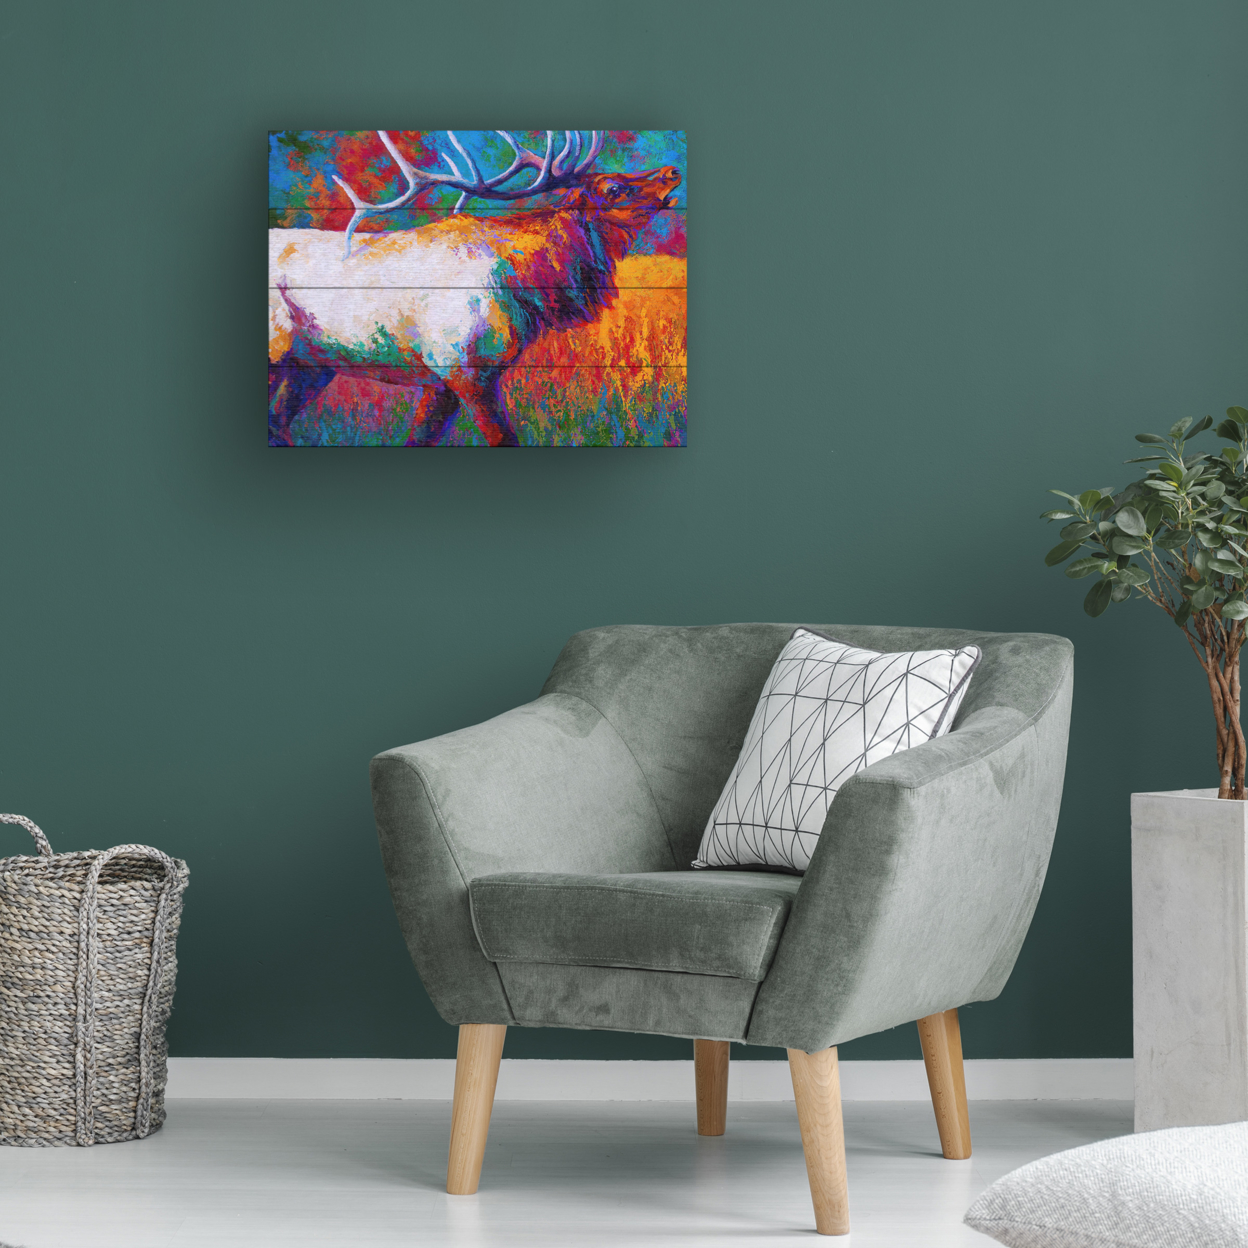 Wall Art 12 X 16 Inches Titled Chorus Elk Ready To Hang Printed On Wooden Planks